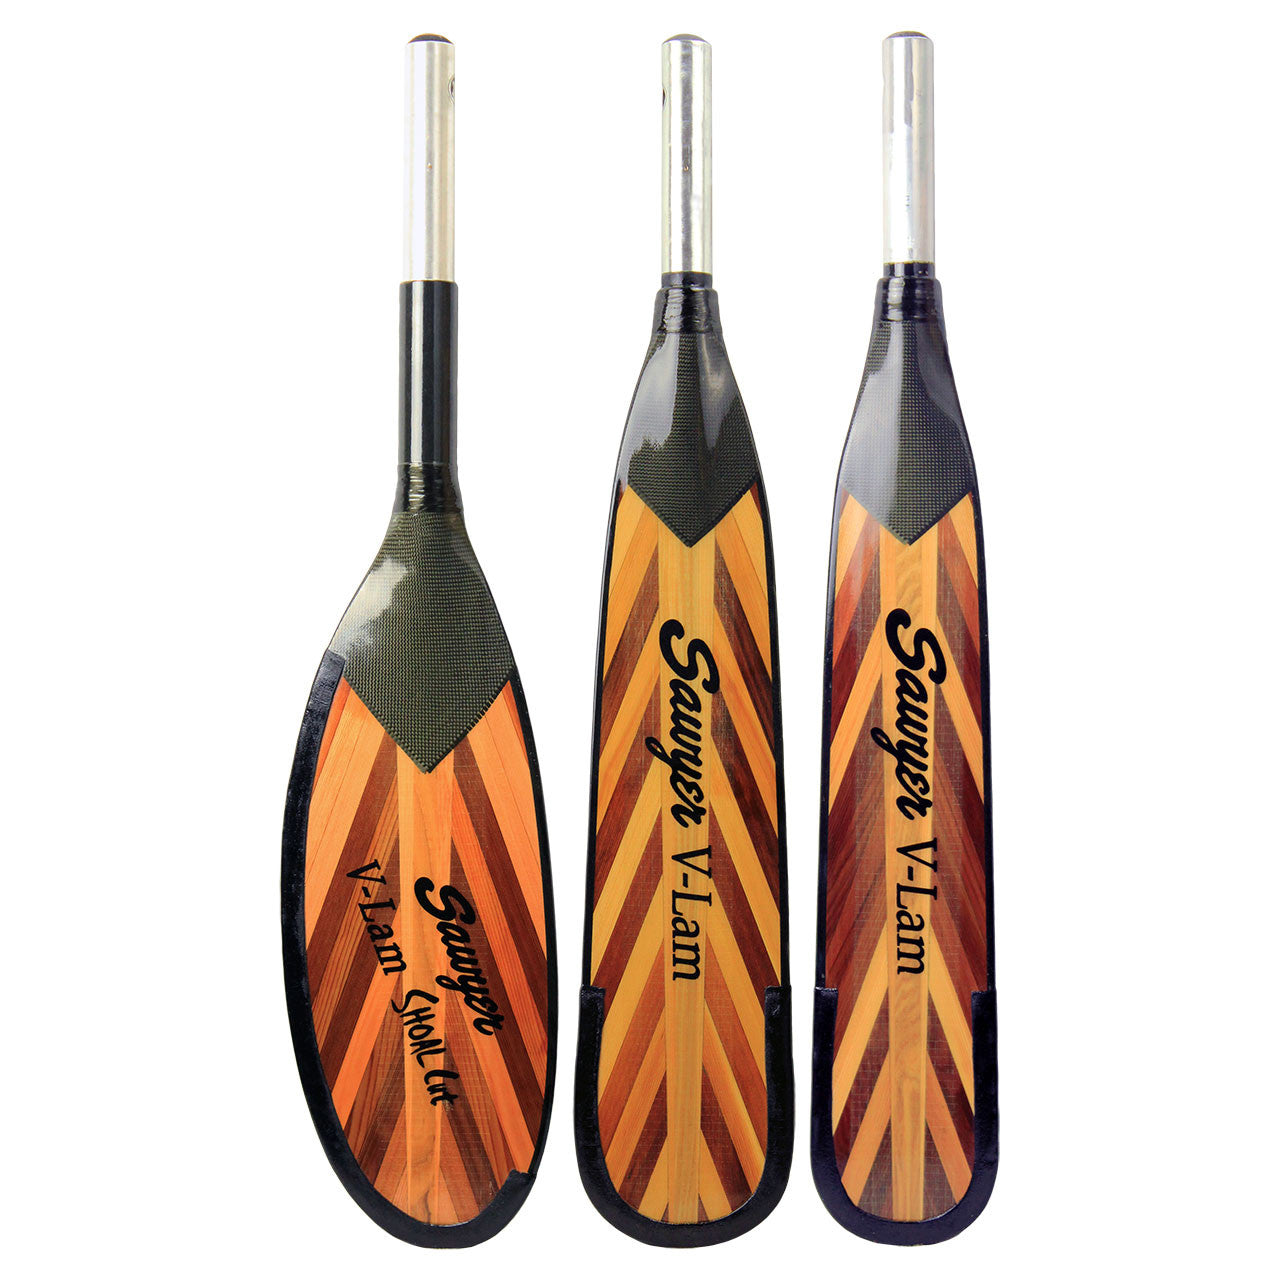 Three V-Lam Fir Oar Blades with different designs on them, featuring fiberglass reinforcement for a light and tough performance, by Sawyer.